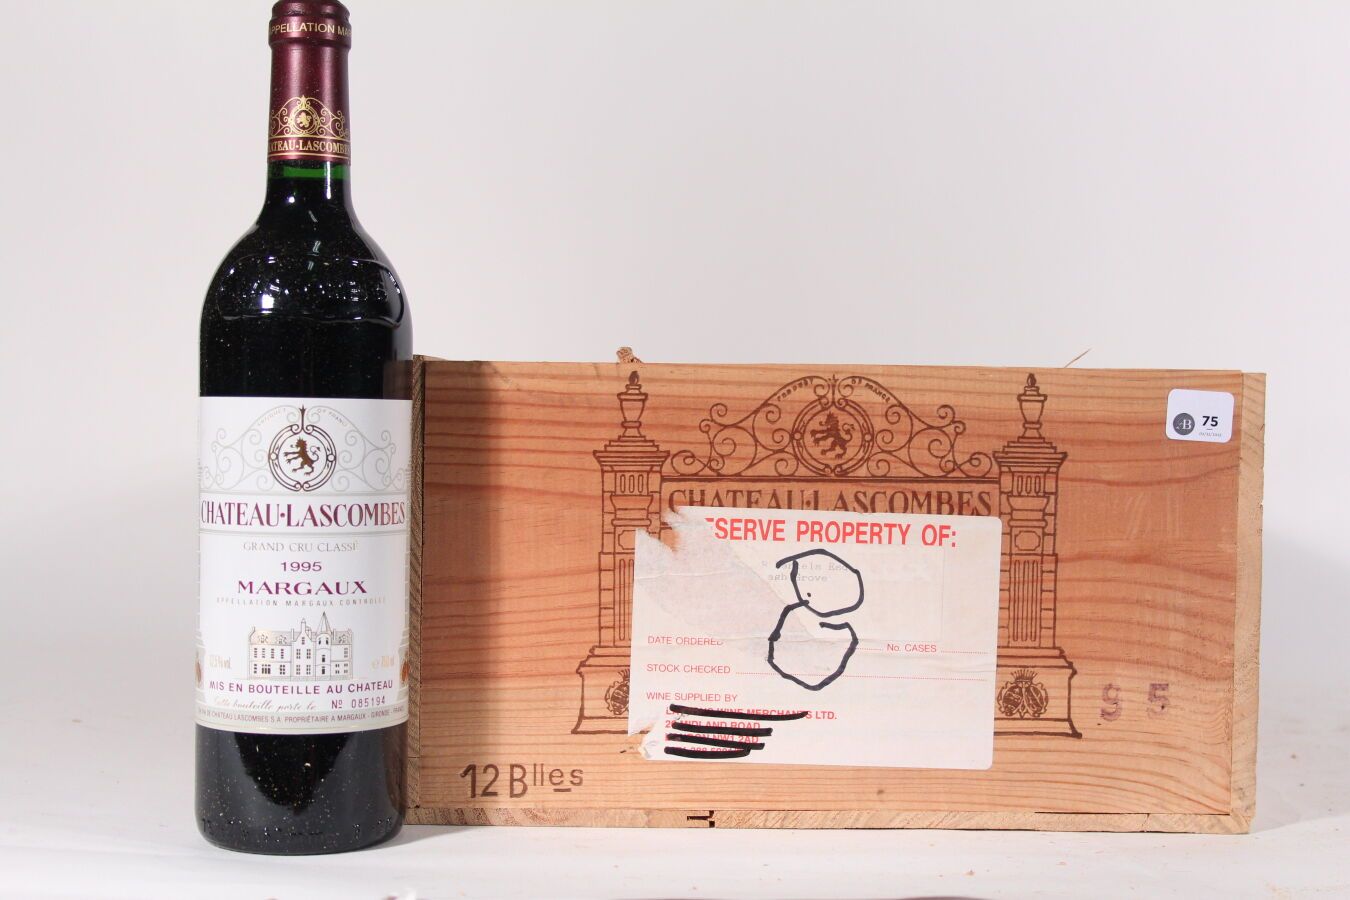 Null 1995 - Château Lascombes
Margaux Red - 12 blles CBO